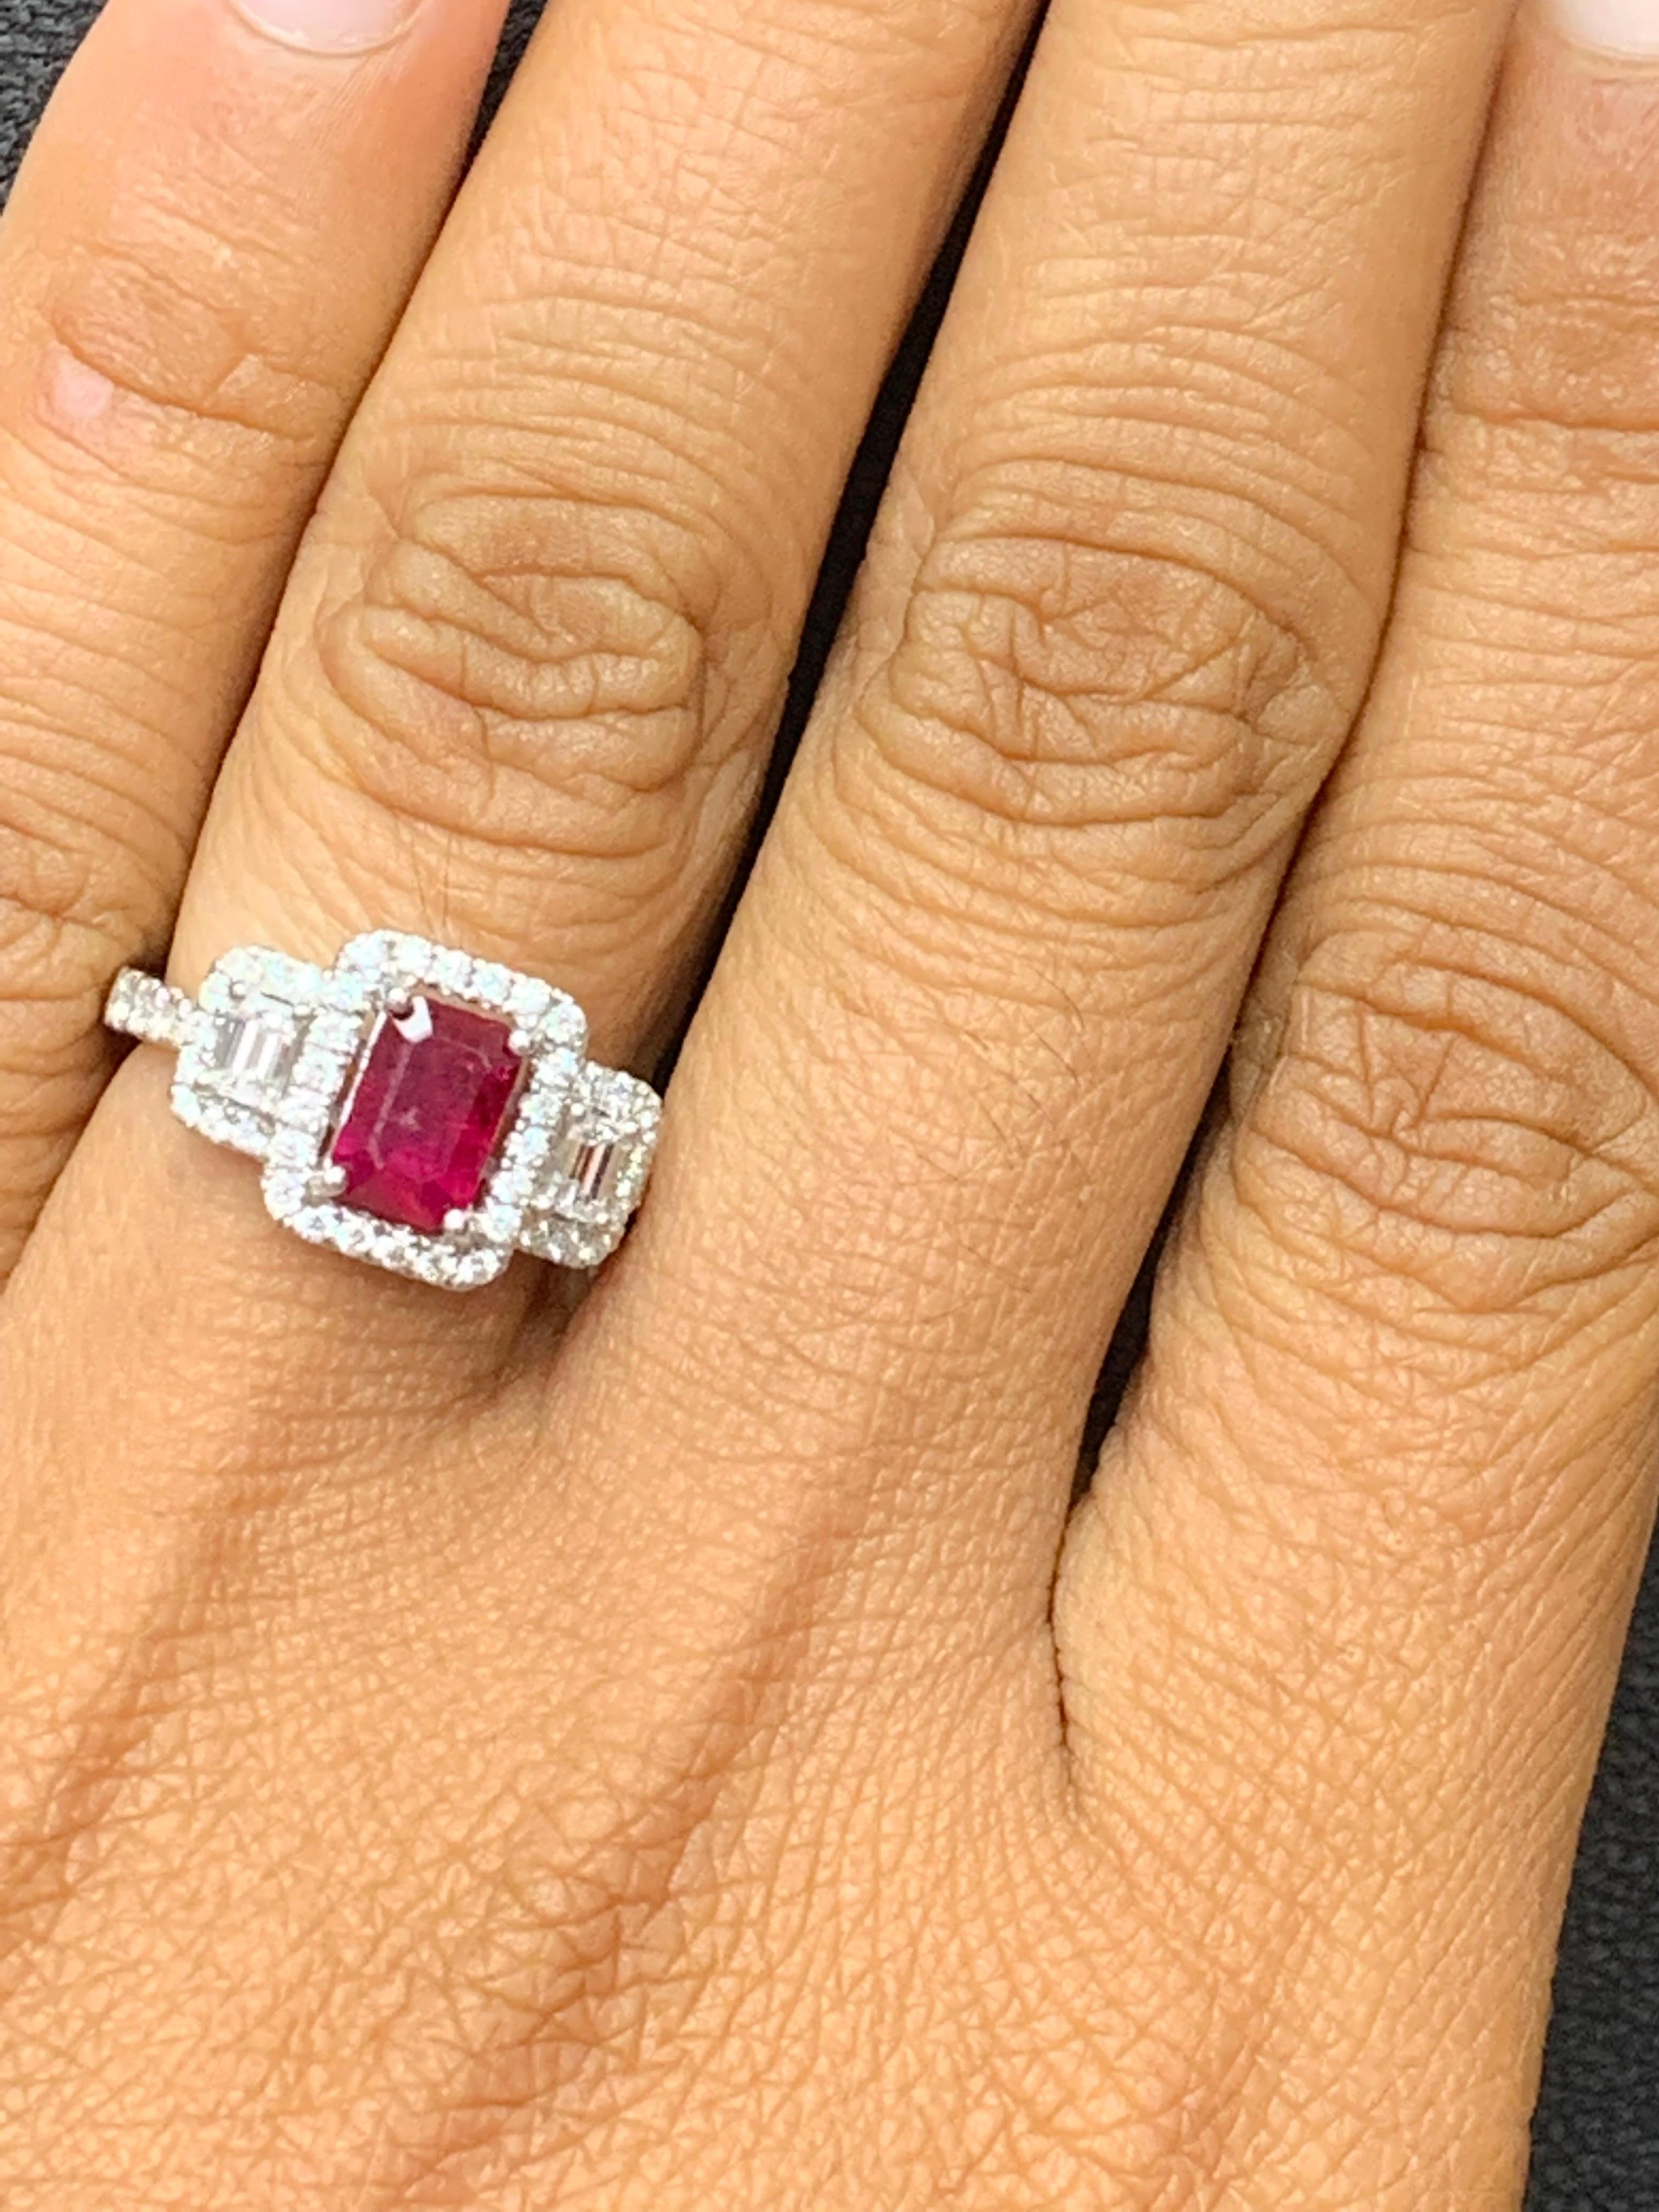 Gorgeous 18k white gold engagement ring set with a 0.85 carat emerald cut ruby center stone surrounded by a row of diamonds weighing 0.44 carat total and flanked by an 0.28 carat Diamonds on each side. The ring is made in 18K White Gold.

Size 6.5